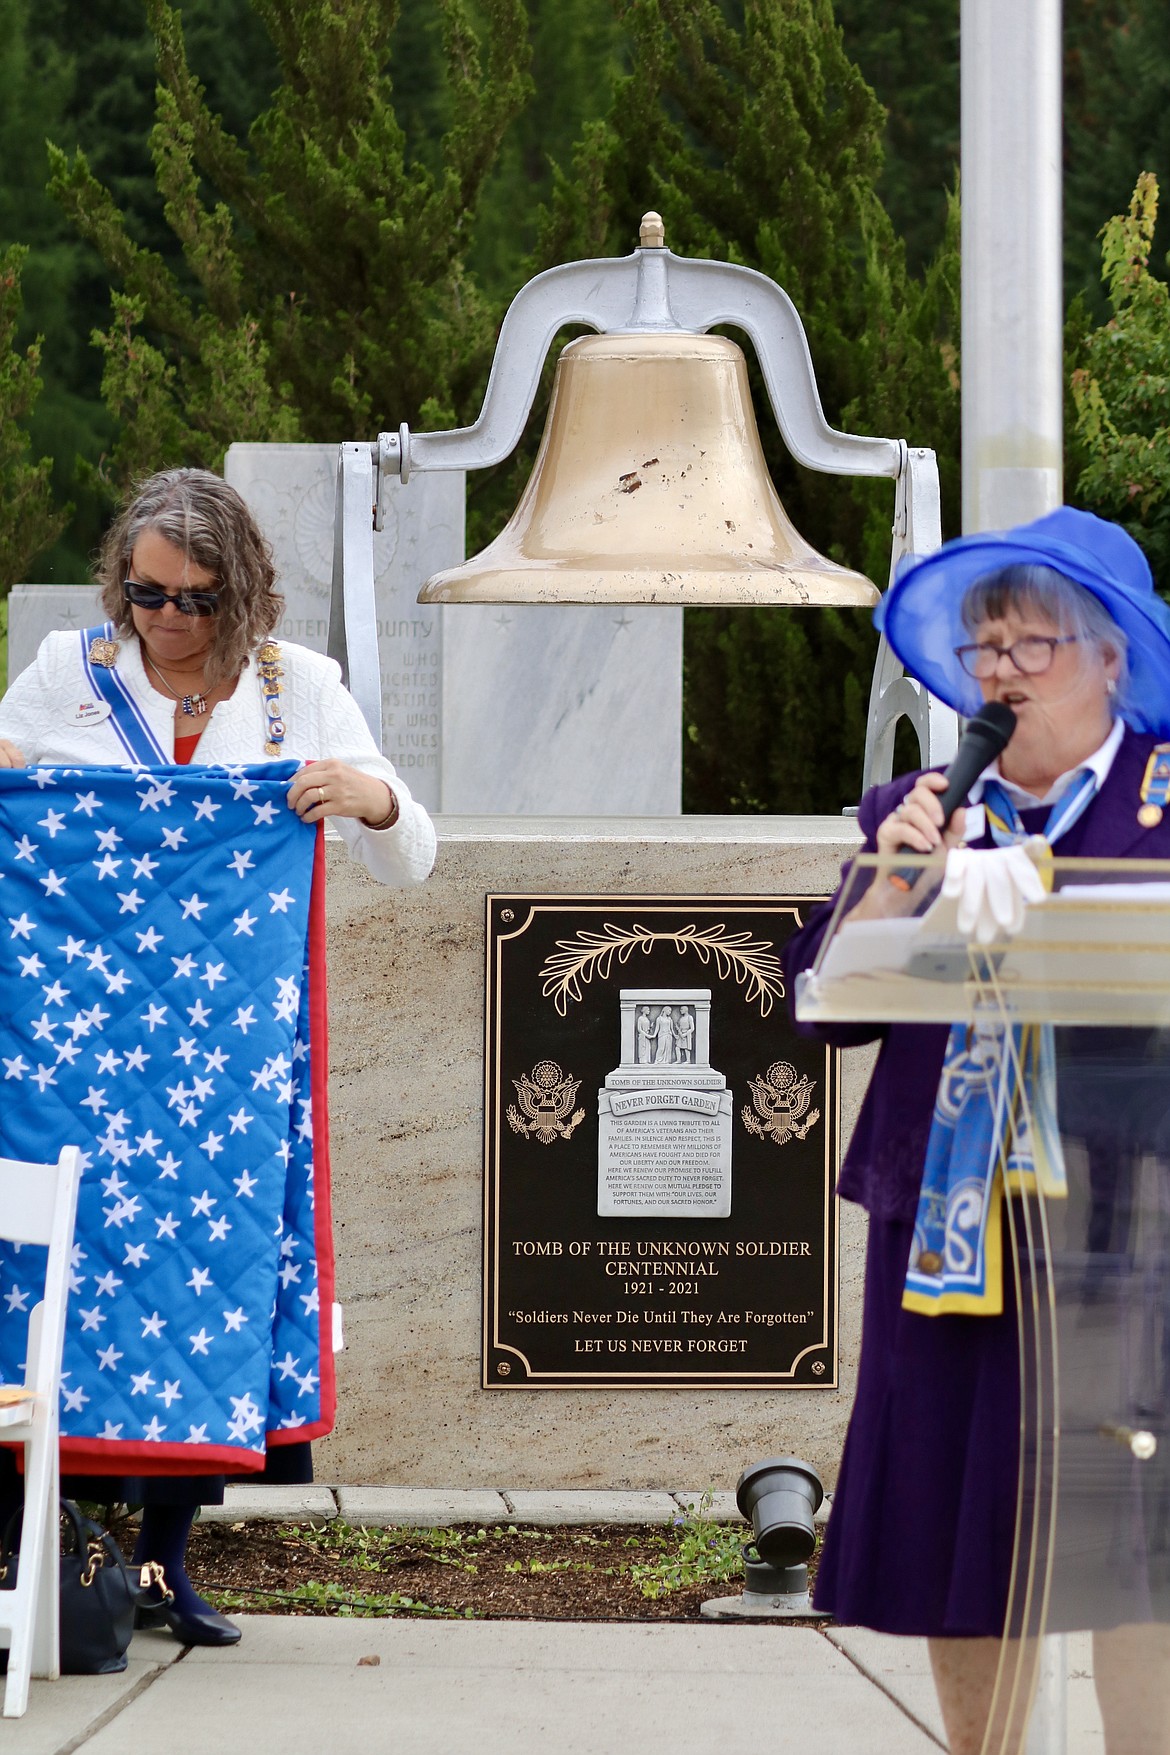 The plaque to commemorate the 100th anniversary of The Tomb of the Unknown Soldier is mounted to "Pappy's Bell" at the Veterans Memorial in McEuen Park in downtown Coeur d’Alene. From left, Elizabeth Jones of Post Falls, Honorary Idaho State Regent of the National Society Daughters of the American Revolution, and Sandra Coultrap, President of the Edward Carleton Chapter, National Society Colonial Dames of the 17th Century at the ceremony on Saturday. HANNAH NEFF/Press